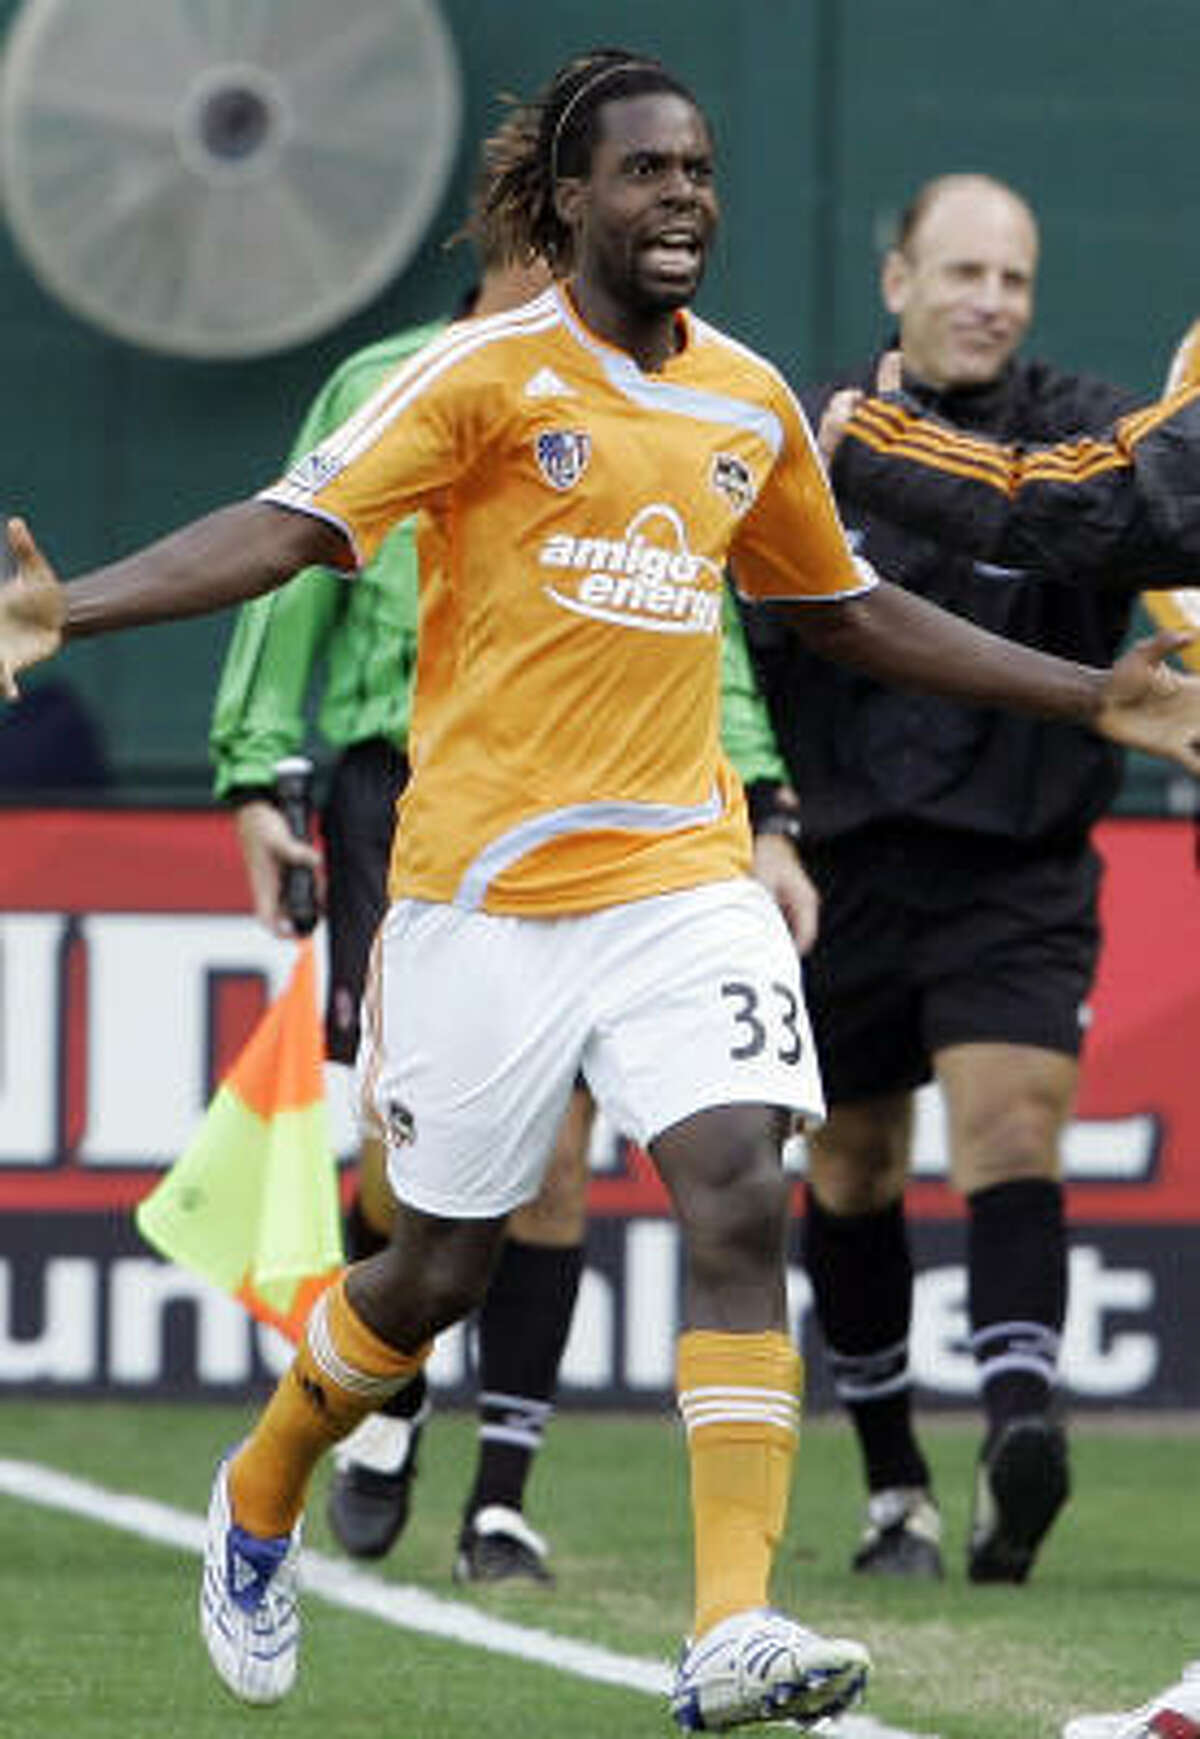 Joseph Ngwenya was a member of the Houston Dynamo long enough to win the MLS Cup championship in 2007, bue the franchise wants him back.